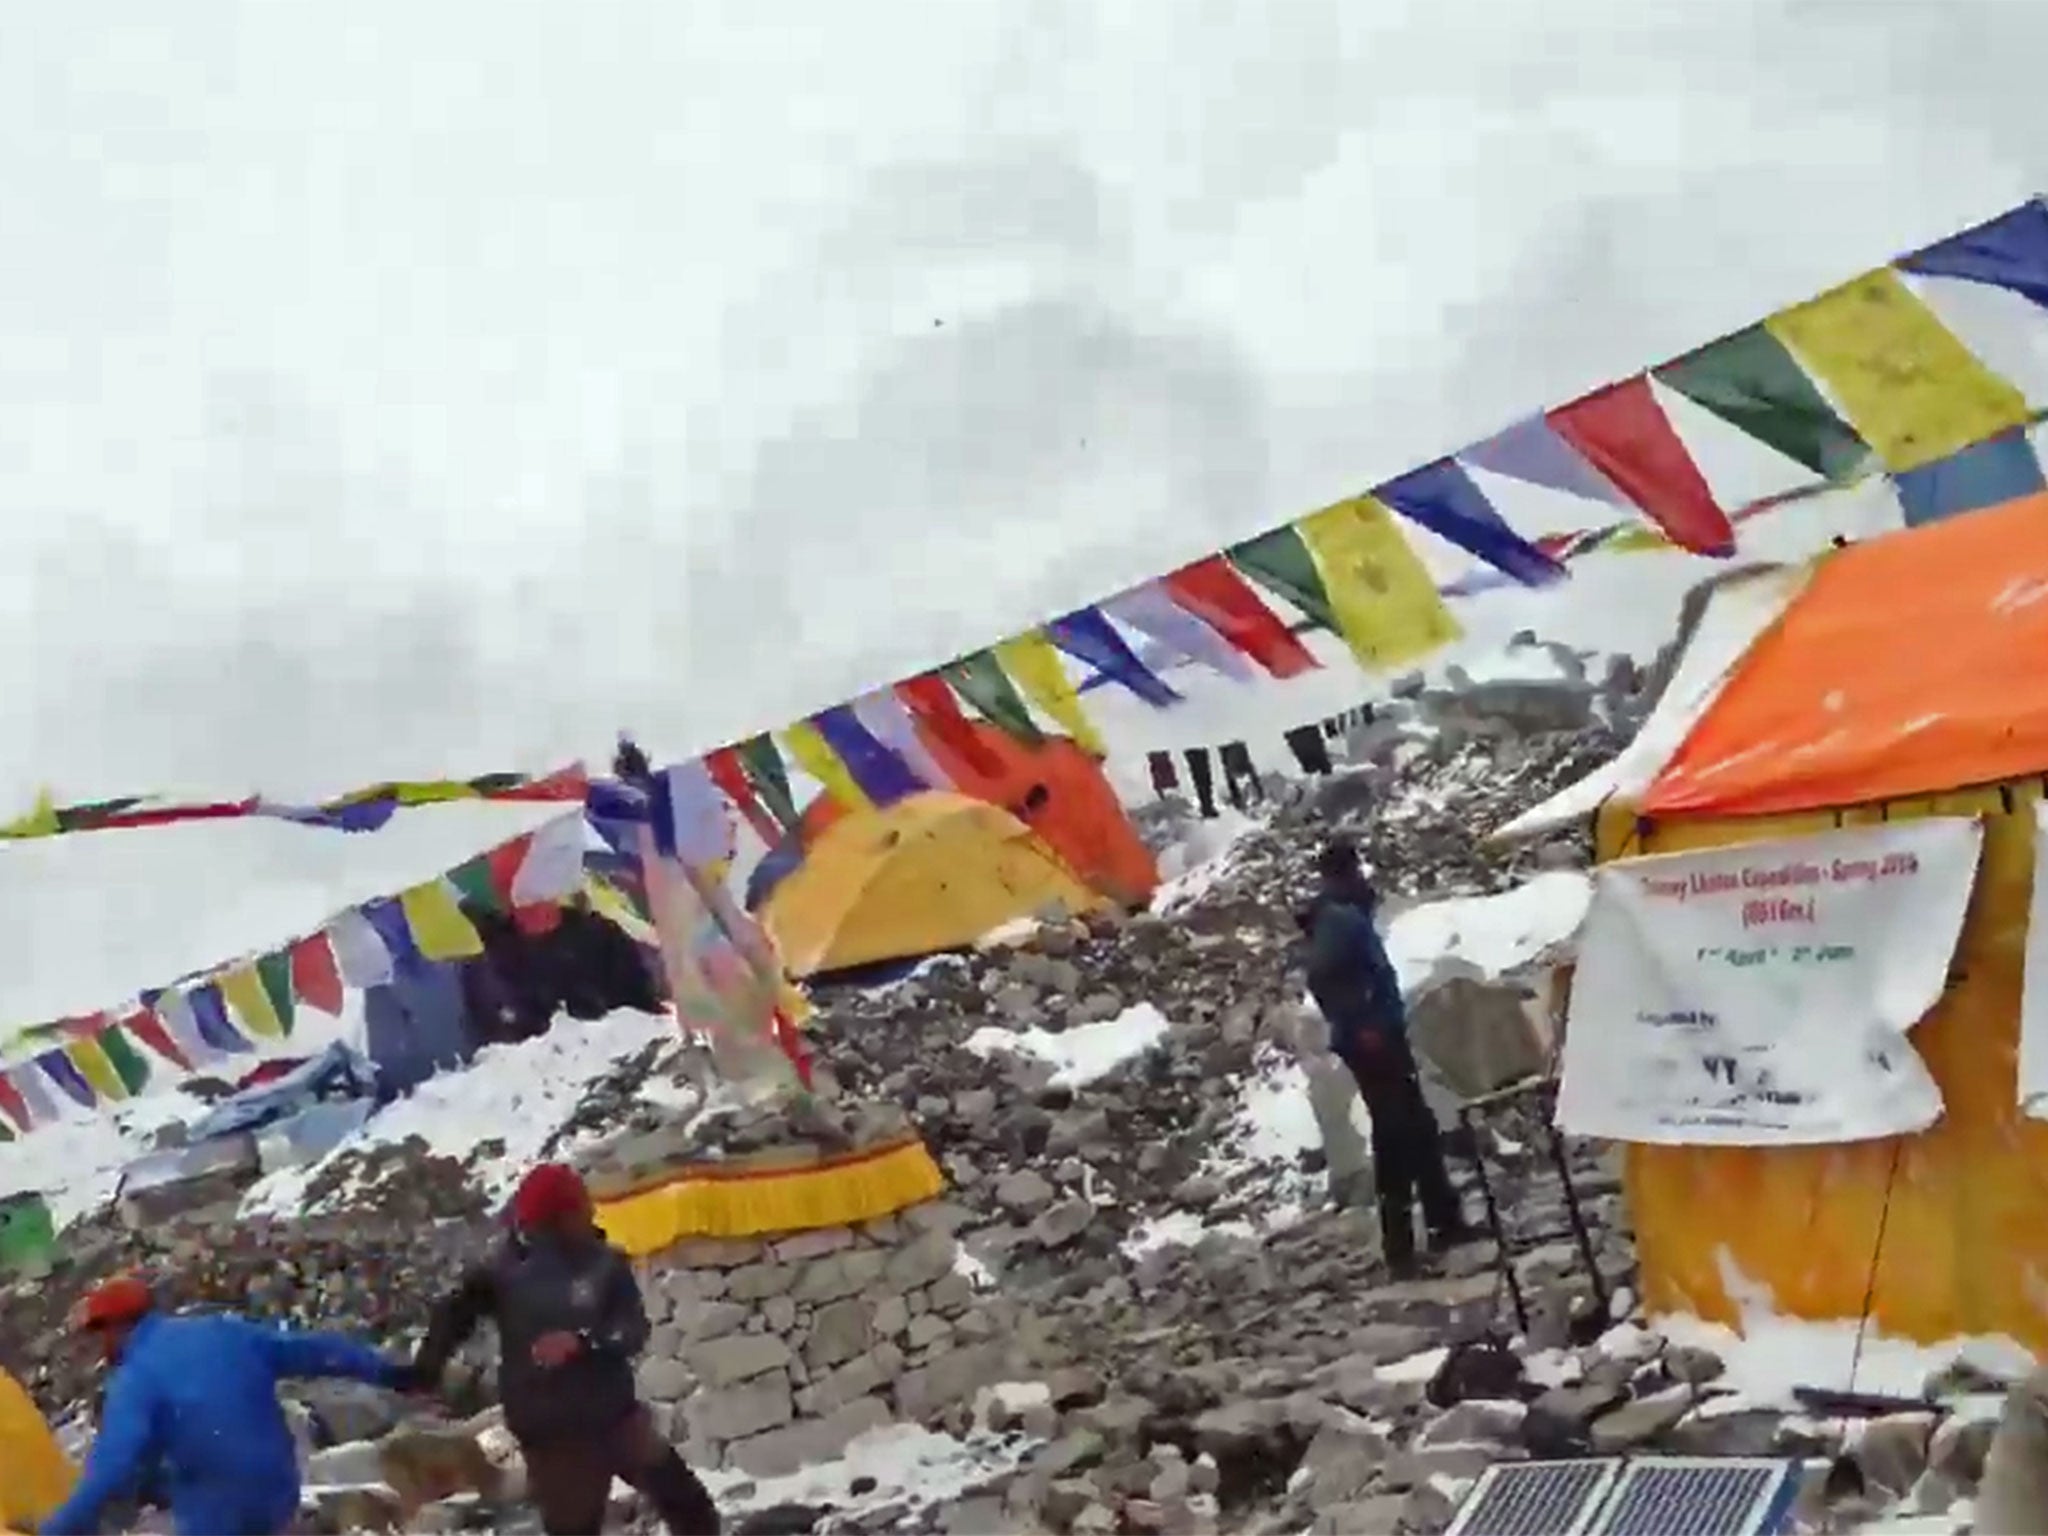 The moment an avalanche hit an Everest base camp